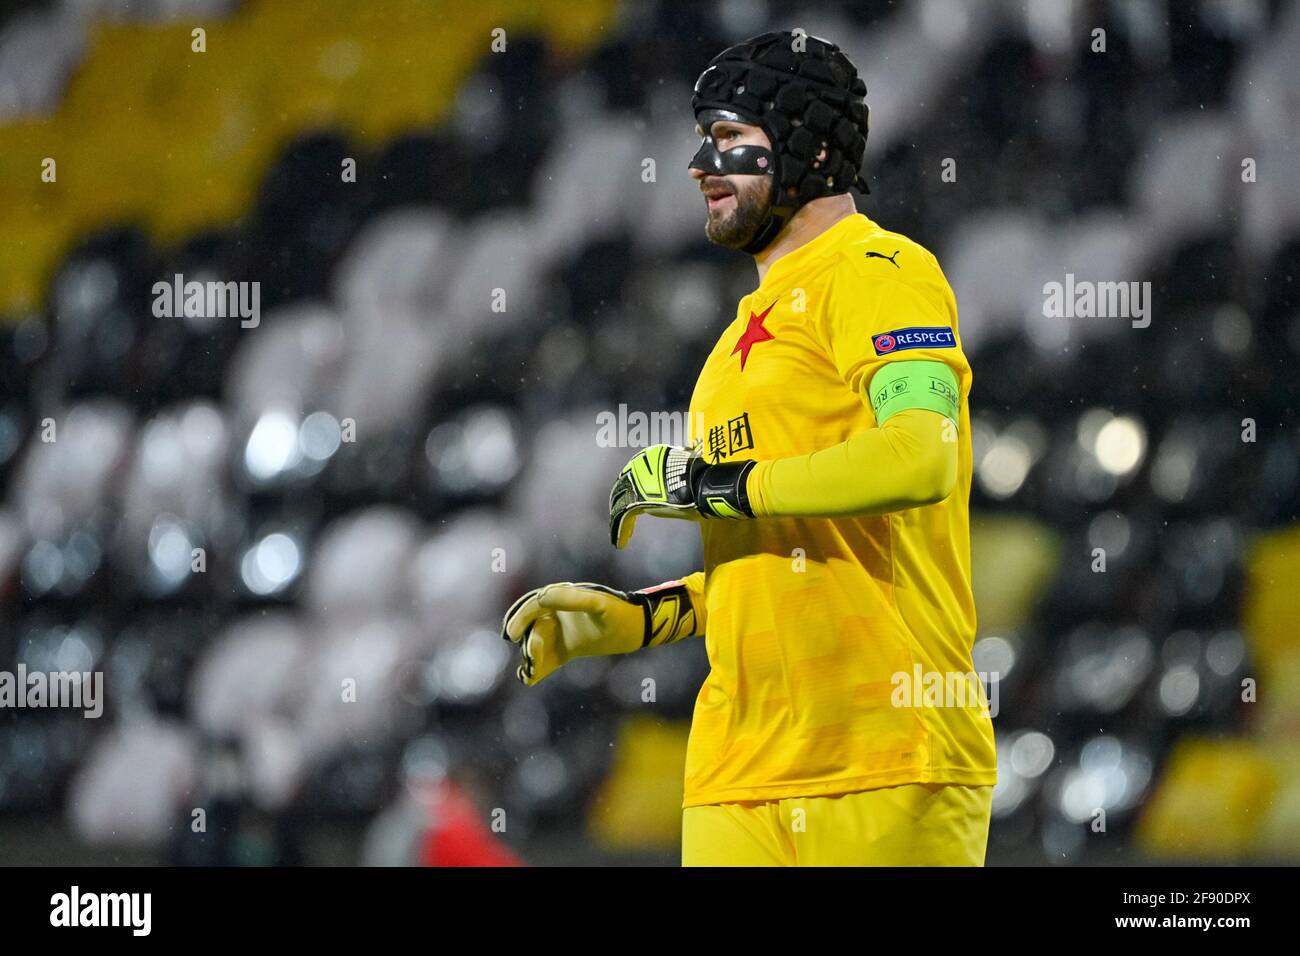 Prague, Czech Republic. 15th Apr, 2021. Goalie of Slavia Ondrej Kolar in action during the FC European Football League quarterfinal match SK Slavia Prague vs Arsenal in Prague, Czech Republic, April 15, 2021. Kolar played the Europa League quarterfinal game against Arsenal with a protective face mask. The UEFA disciplinary was banned Kemar Roofe of Rangers from four matches because he kicked in the face Slavia's goalkeeper Ondrej Kolar, March 18, 2021. Credit: Vit Simanek/CTK Photo/Alamy Live News Stock Photo